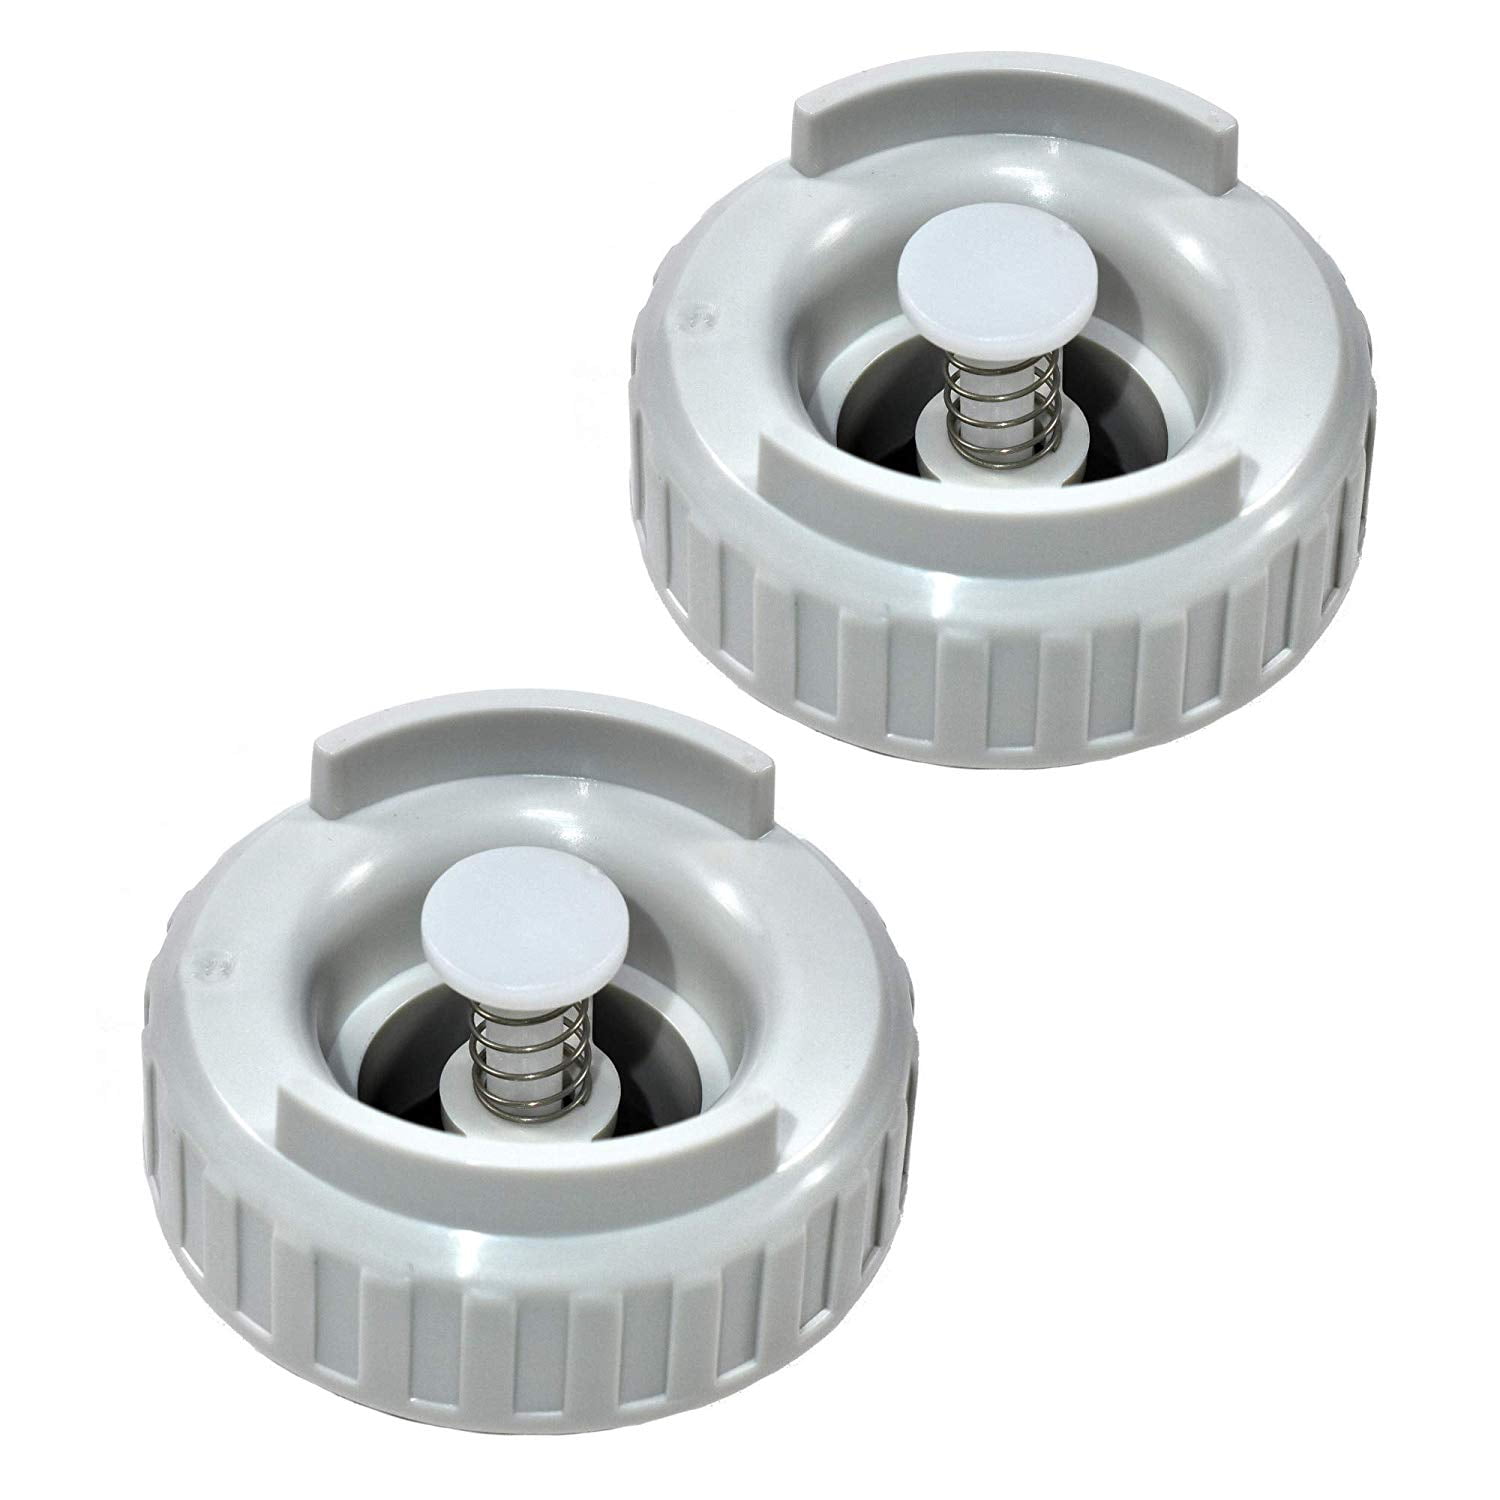 Humidifier Bottle Valve Cap Fits Emerson Moistair Kenmore 2-Pack Beauty New 